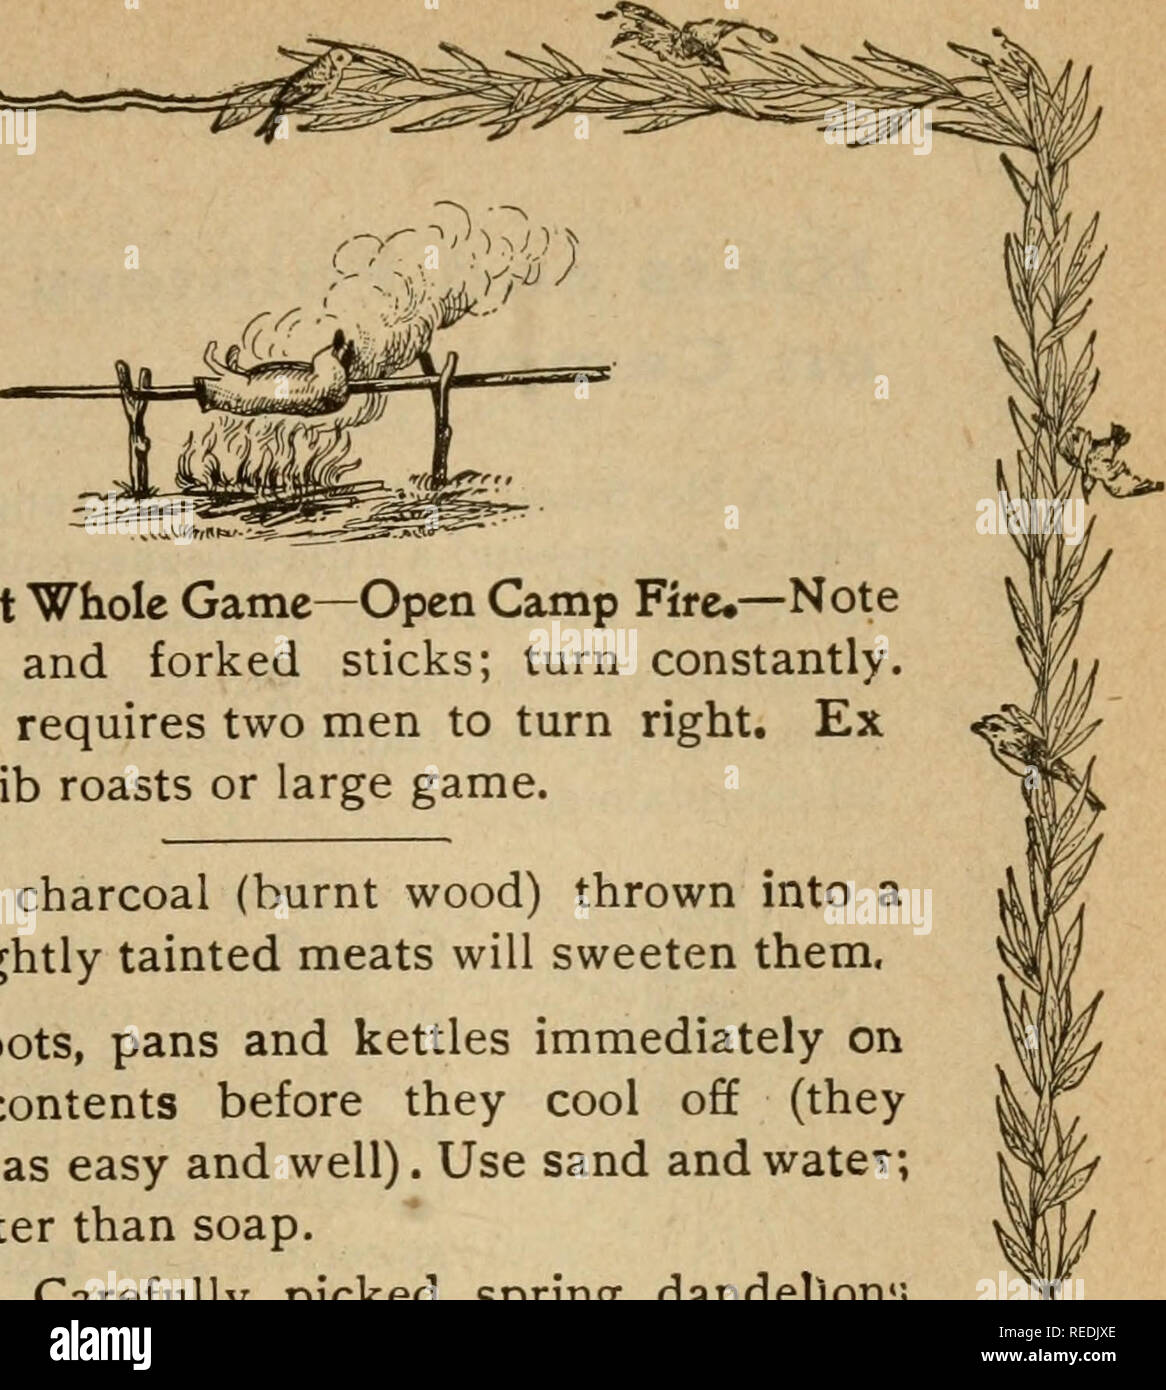 . The complete American and Canadian sportsman's encyclopedia of valuable instruction. Camping; Fishing; Hunting. I m. To Roast Whole Game—Open Camp Fire.—Note above spit and forked sticks; turn constantly. Large game requires two men to turn right. Ex cellent for rib roasts or large game. A little charcoal (burnt wood) thrown into a pot with slightly tainted meats will sweeten them. Scour pots, pans and kettles immediately on emptying contents before they cool off (they clean twice as easy and well). Use sand andwatet; It IS far better than soap. Greens,—Carefully picked spring dandellon'j ma Stock Photo